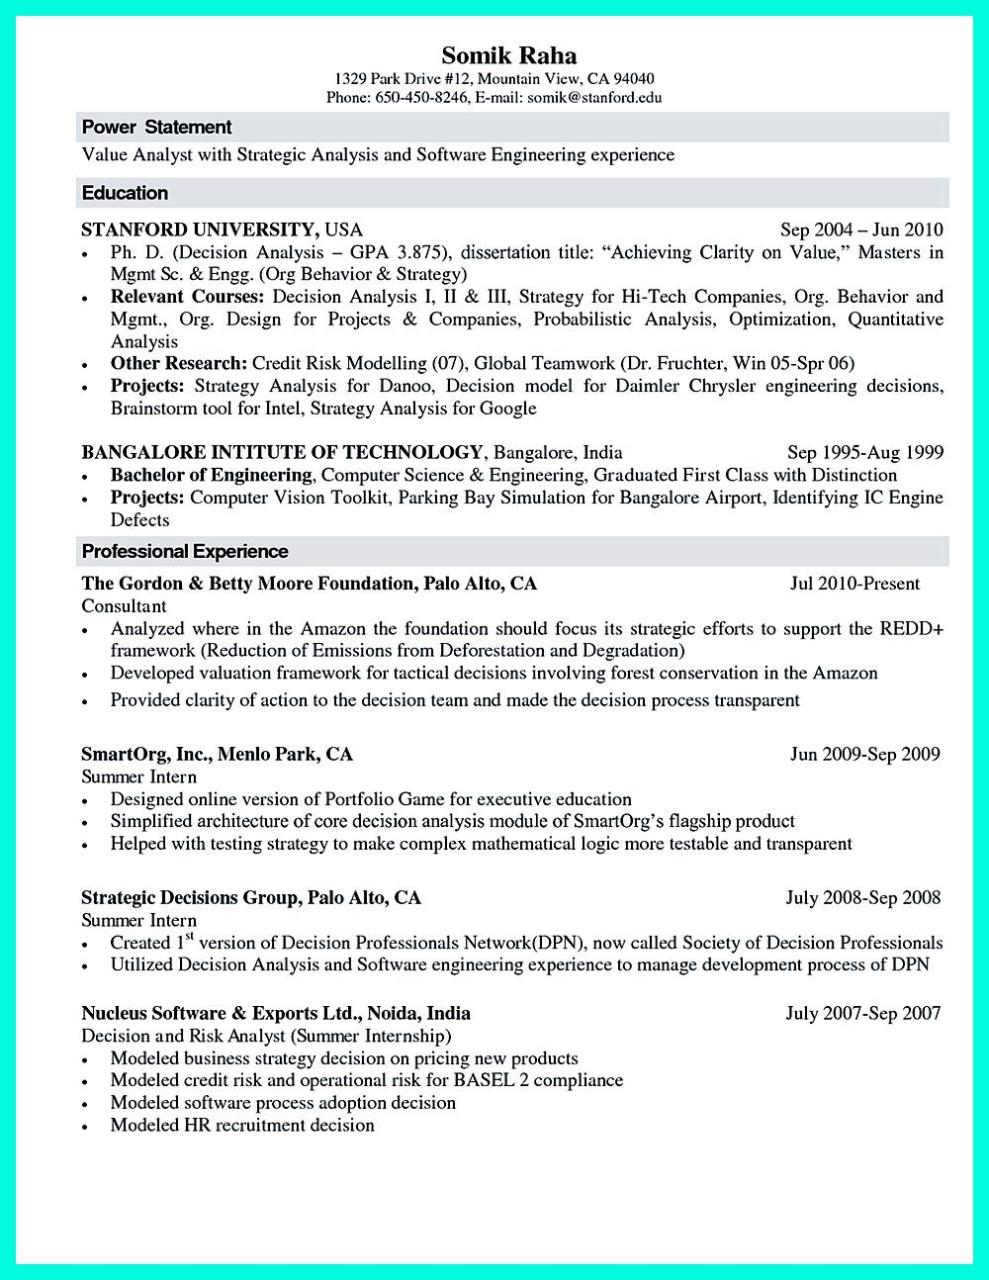 Sample Resume For Software Engineer With 2 Years Experience India